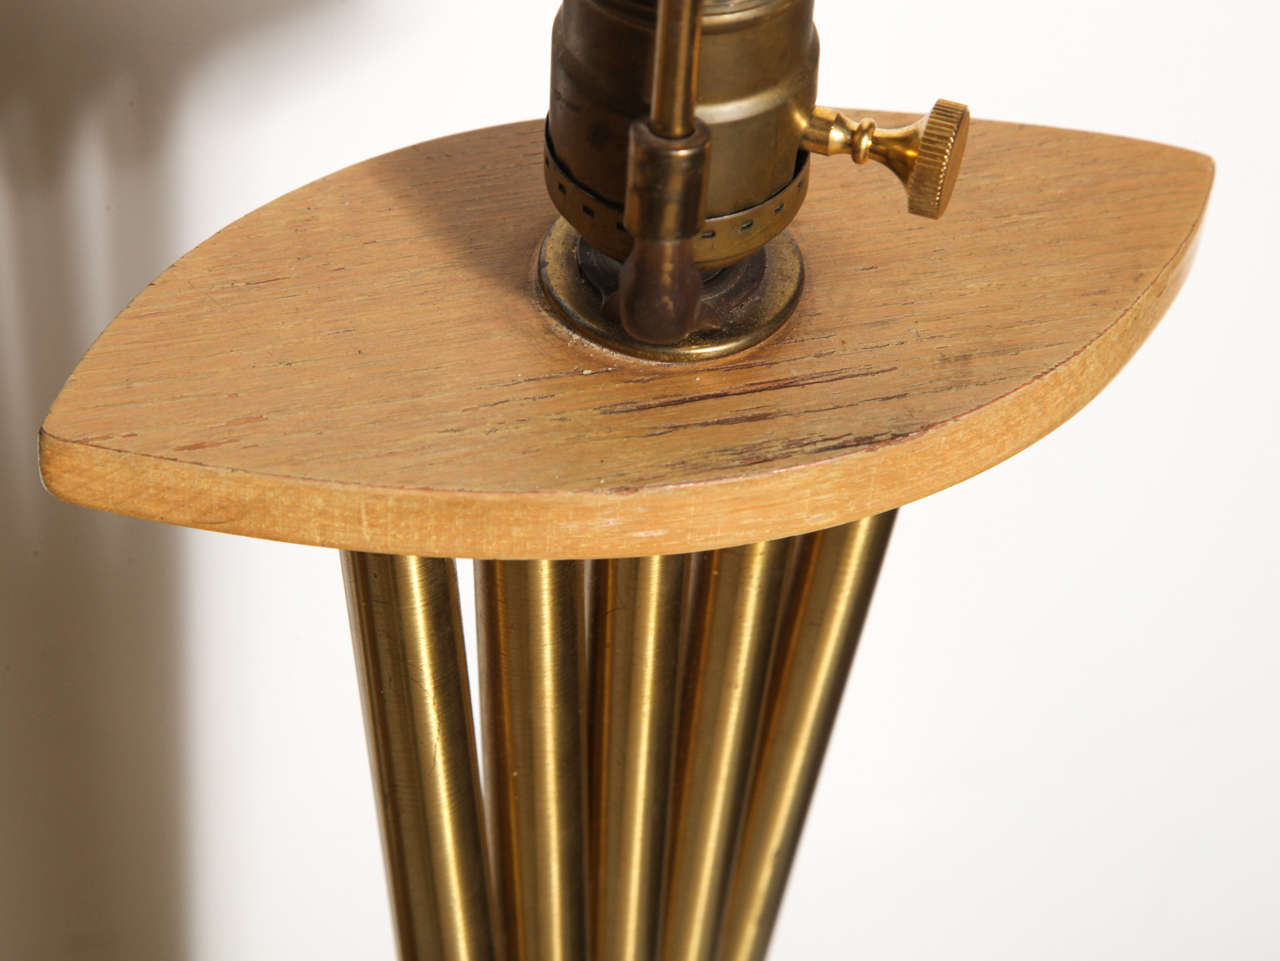 Pair of Russel Wright Style Bleached Oak & Brass Accordion Table Lamps, 1950s For Sale 1